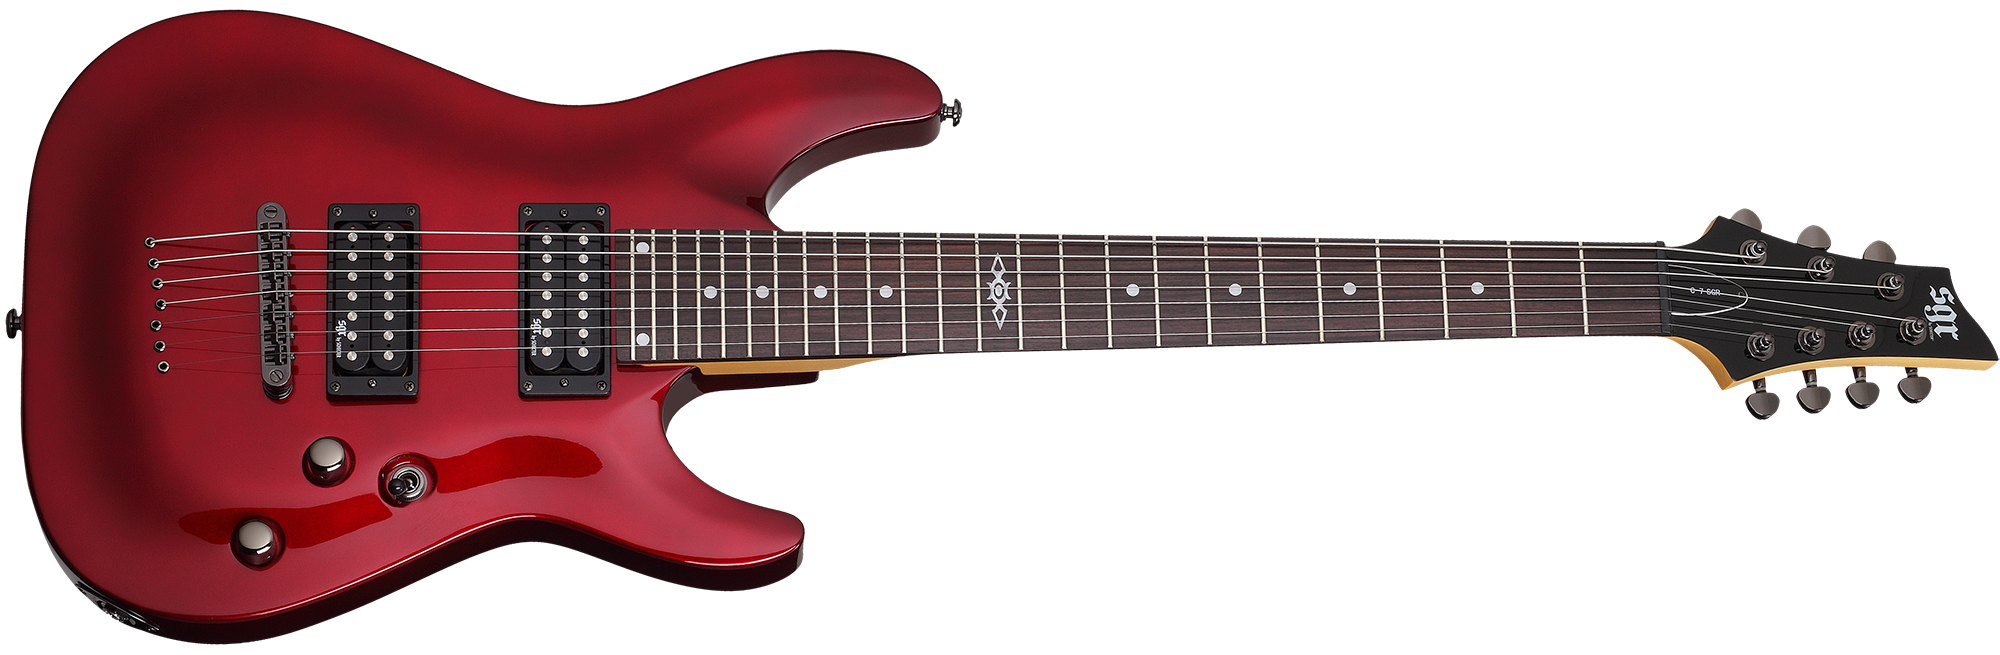 Schecter C-7 SGR by Schecter in Metallic Red MRED SKU 3823 - The Guitar World